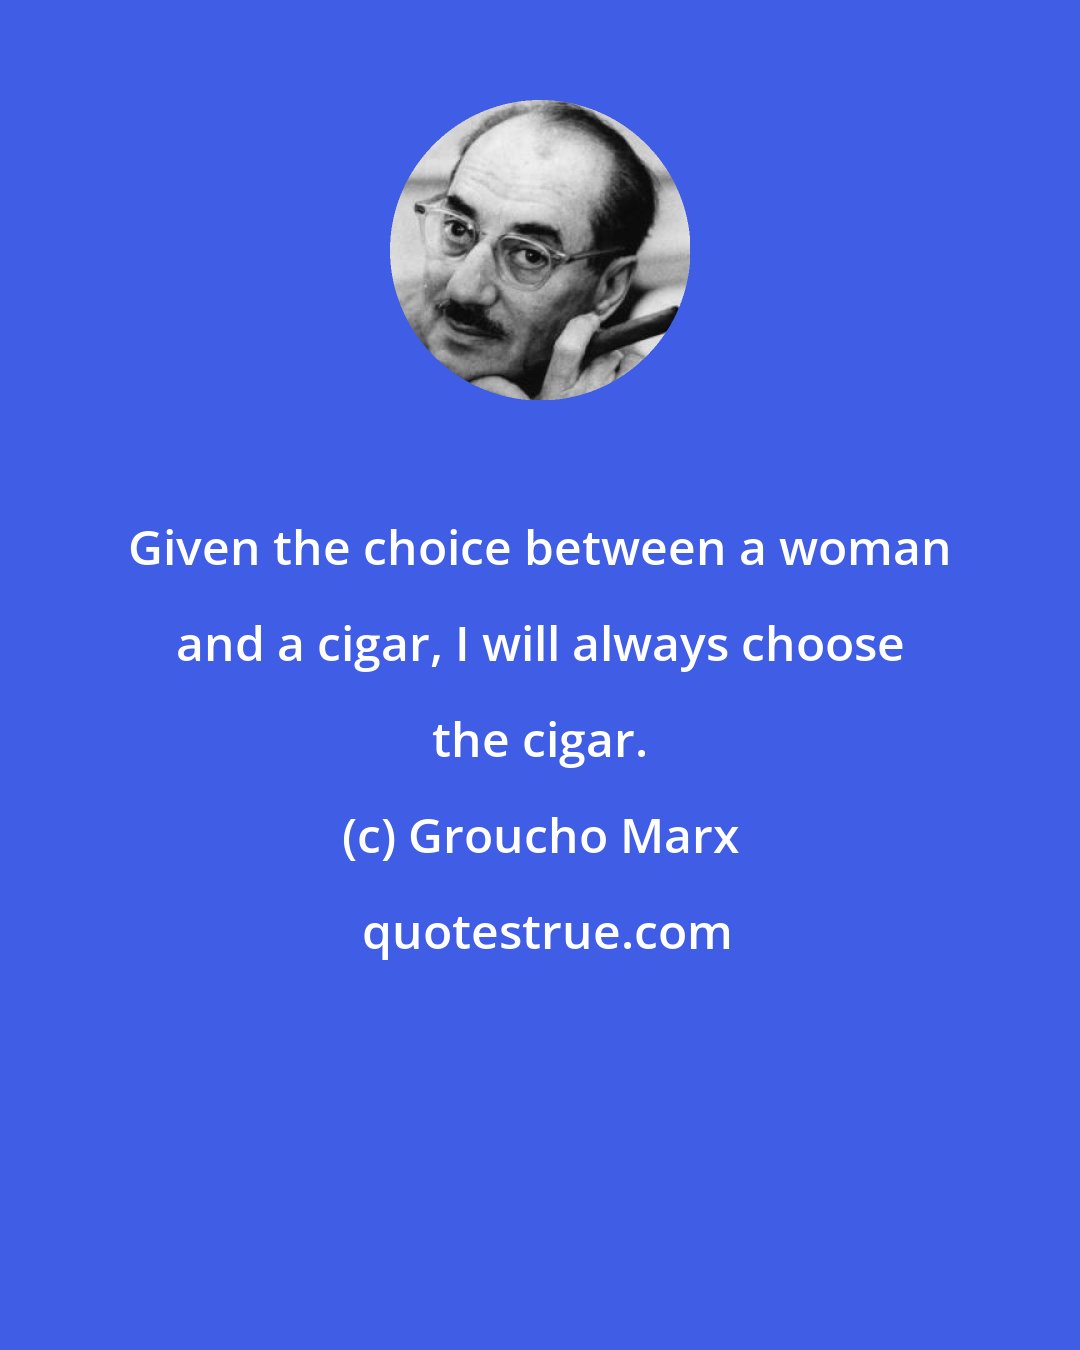 Groucho Marx: Given the choice between a woman and a cigar, I will always choose the cigar.